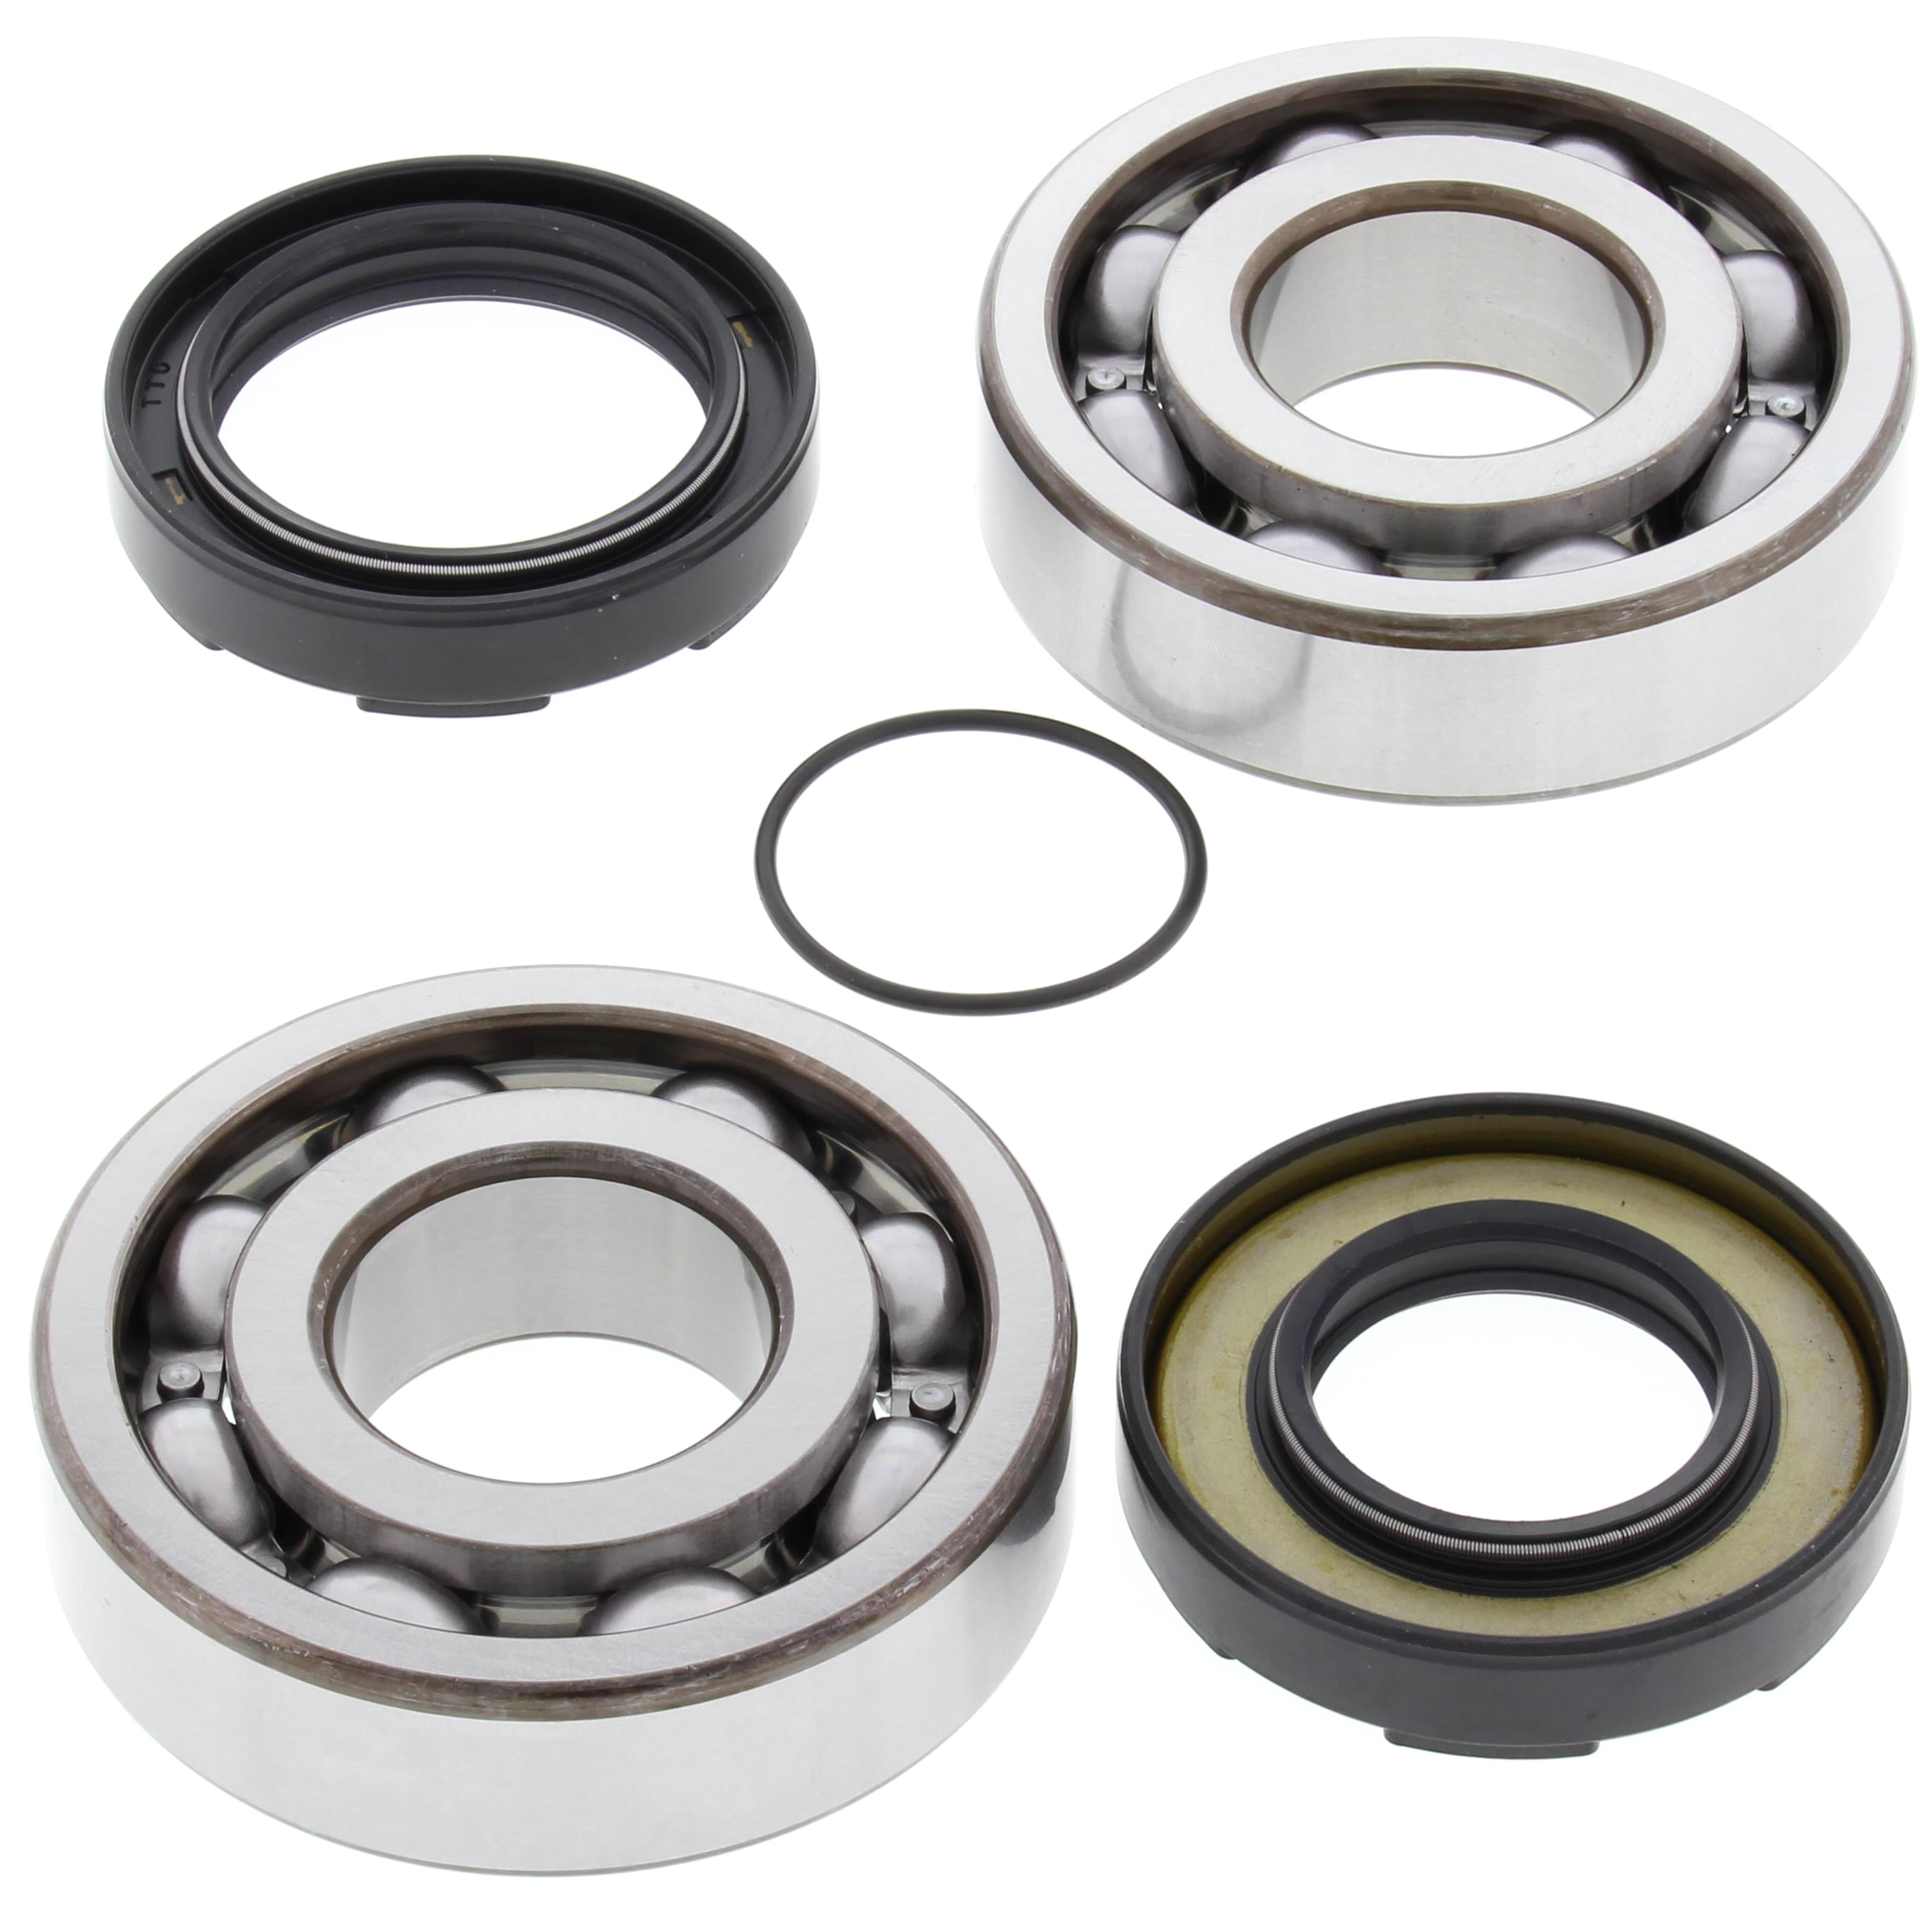 Wheel Front And Rear Bearing Kit for Yamaha 400cc DT400 1975-1978